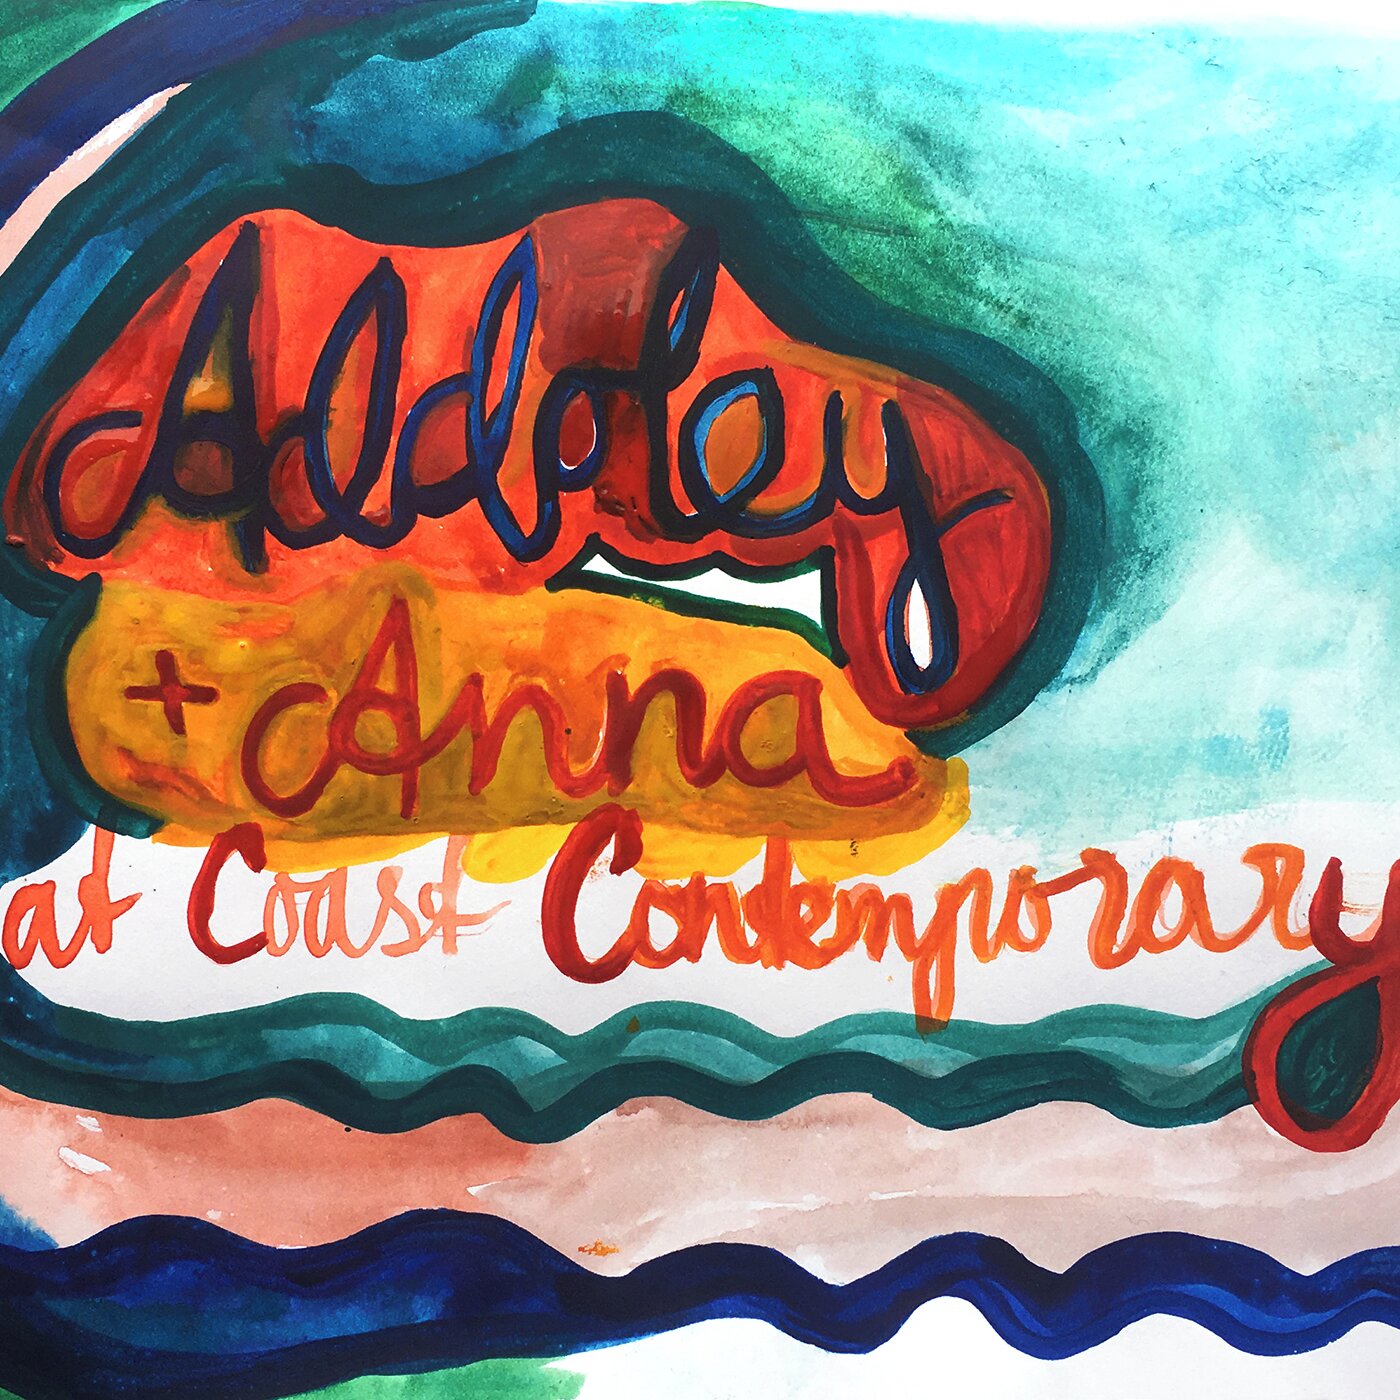 Addoley + anna. podcast poster by anna ihle